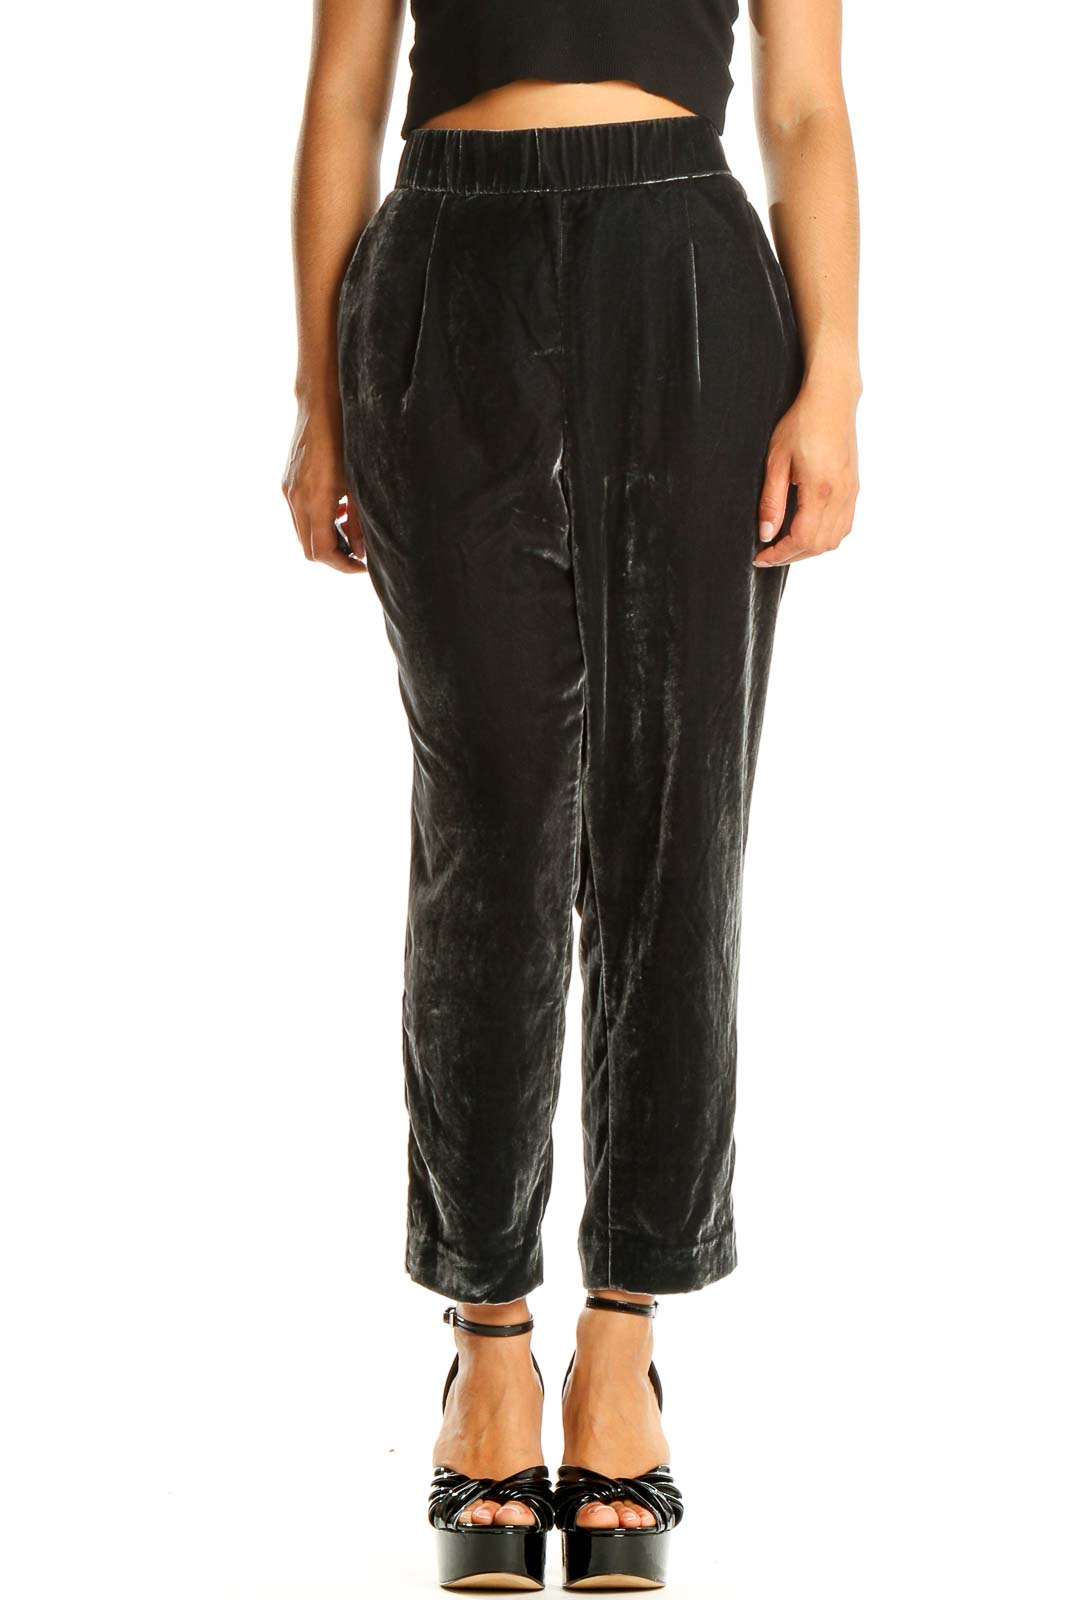 Black Velour Cropped All Day Wear Pants Front